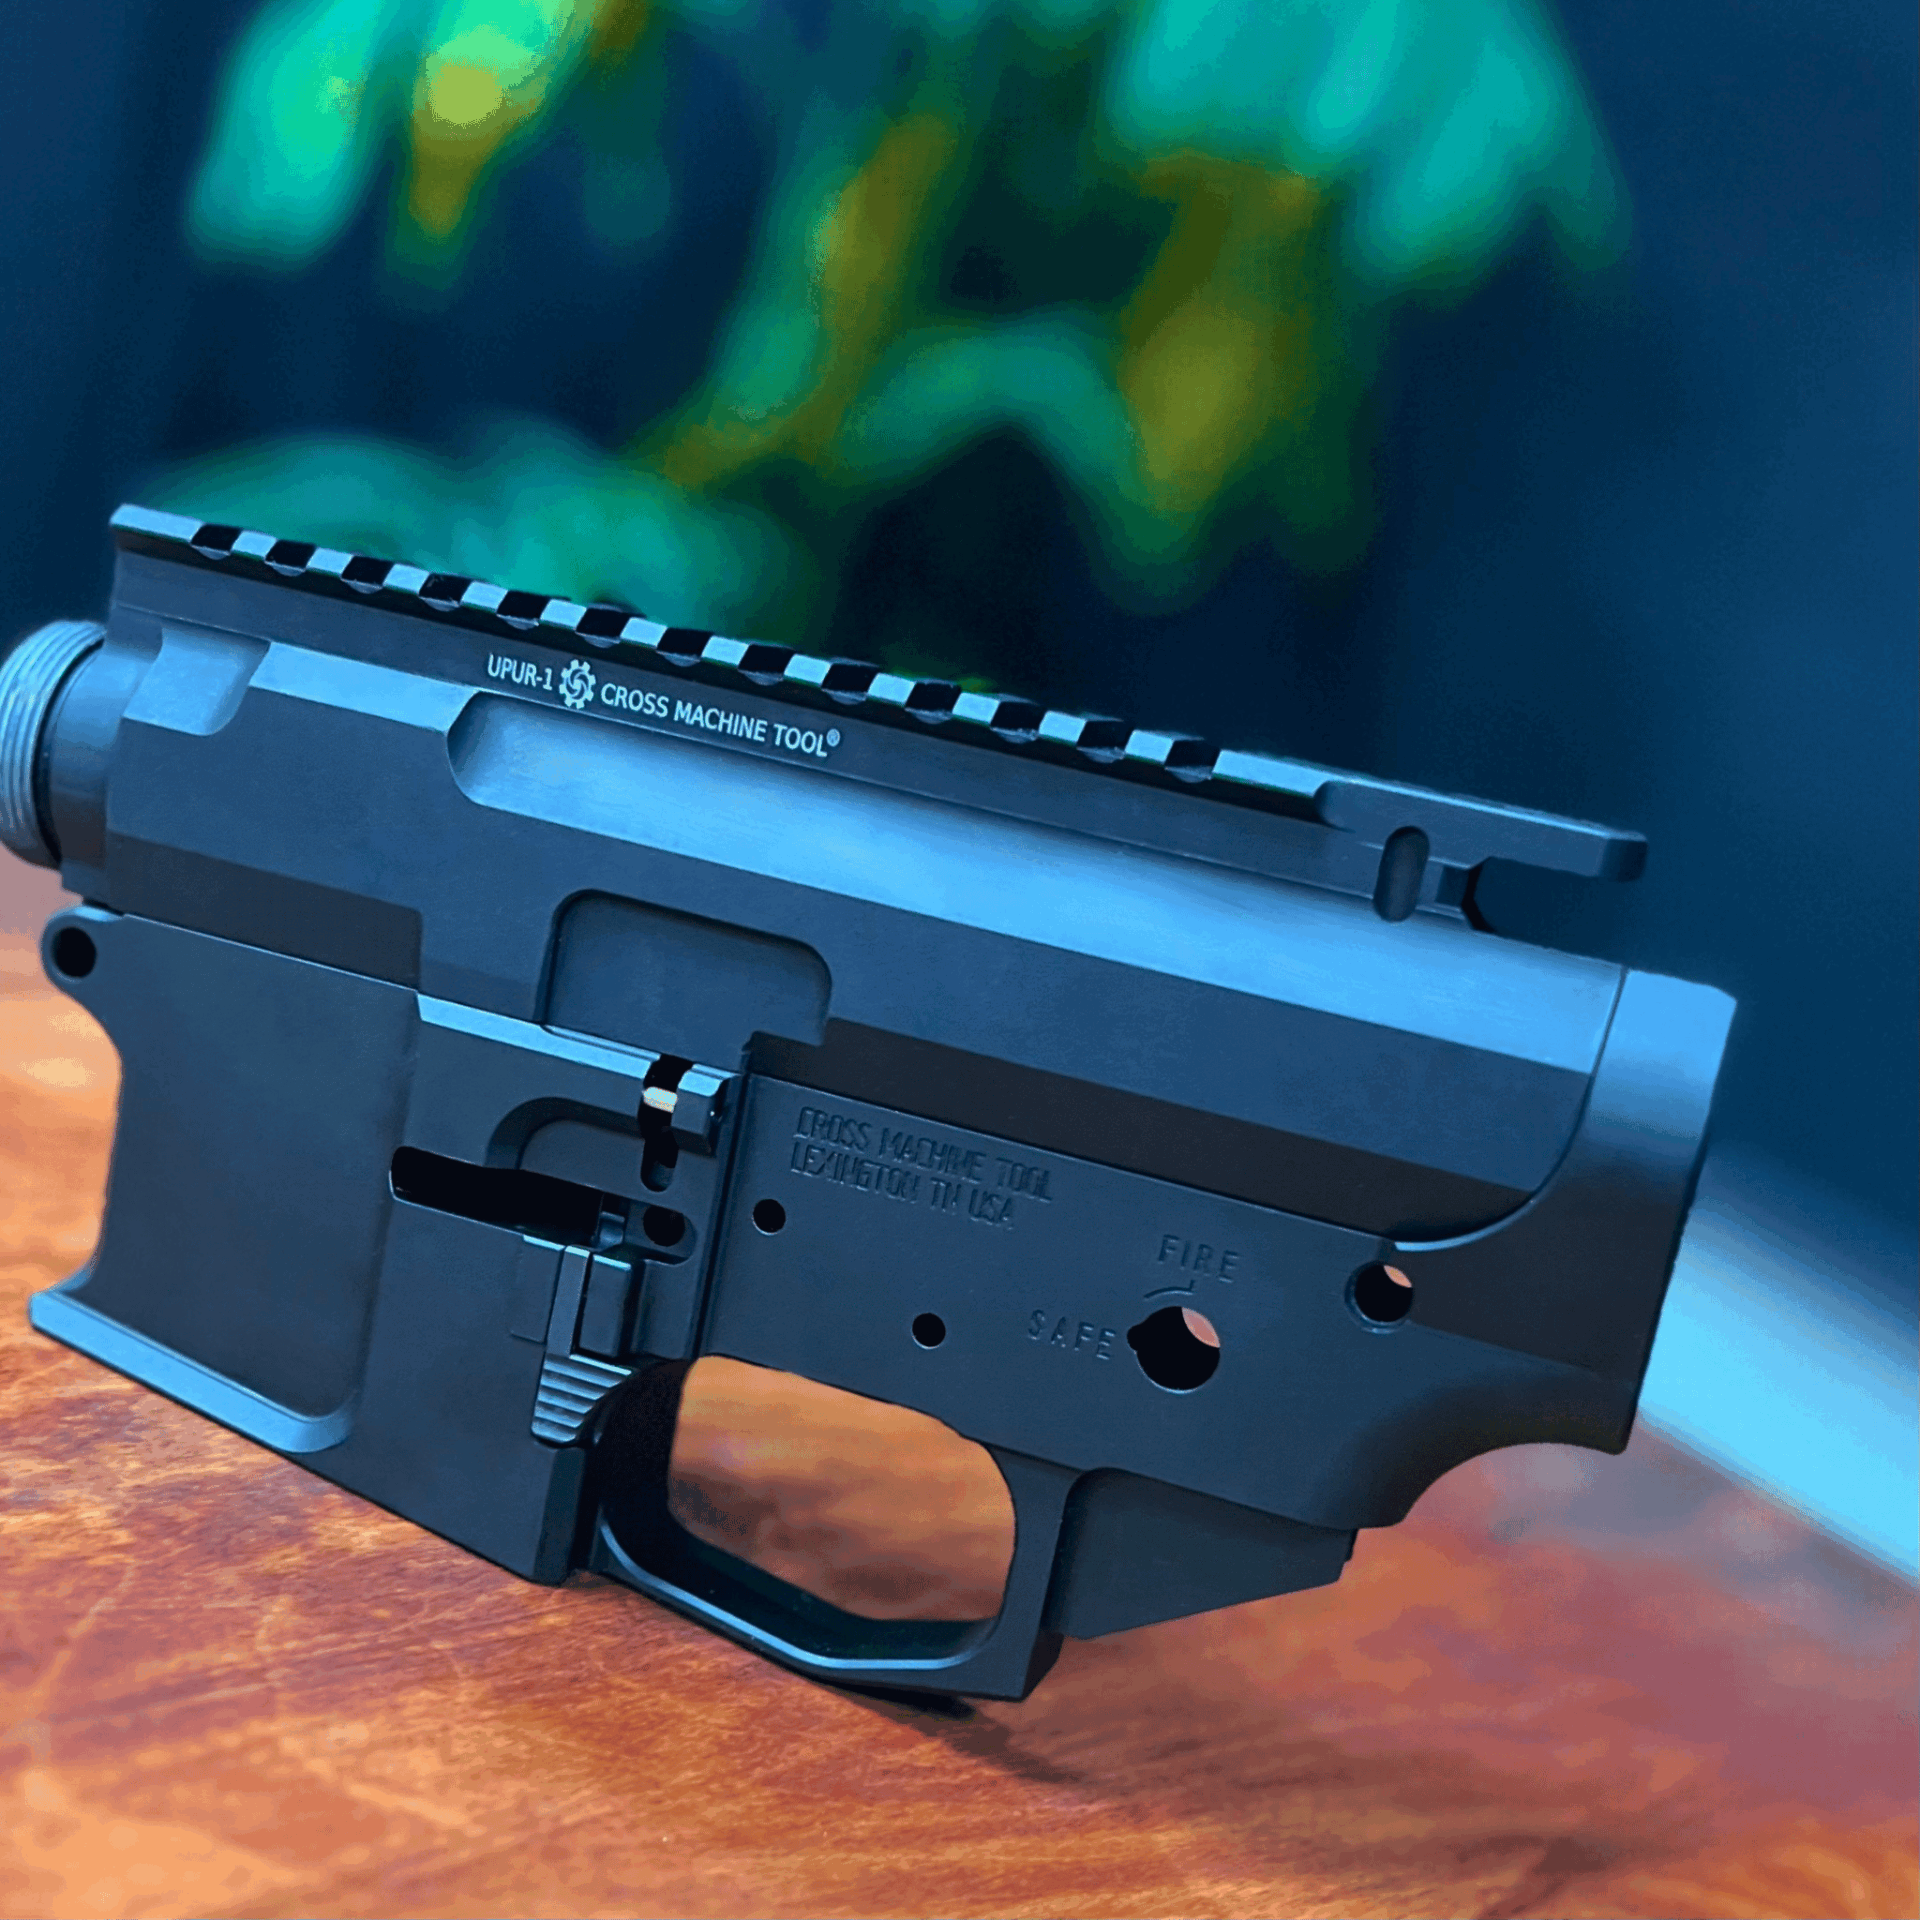 Close-up of a black firearm receiver resting on a wooden surface with a blurred green and black background.